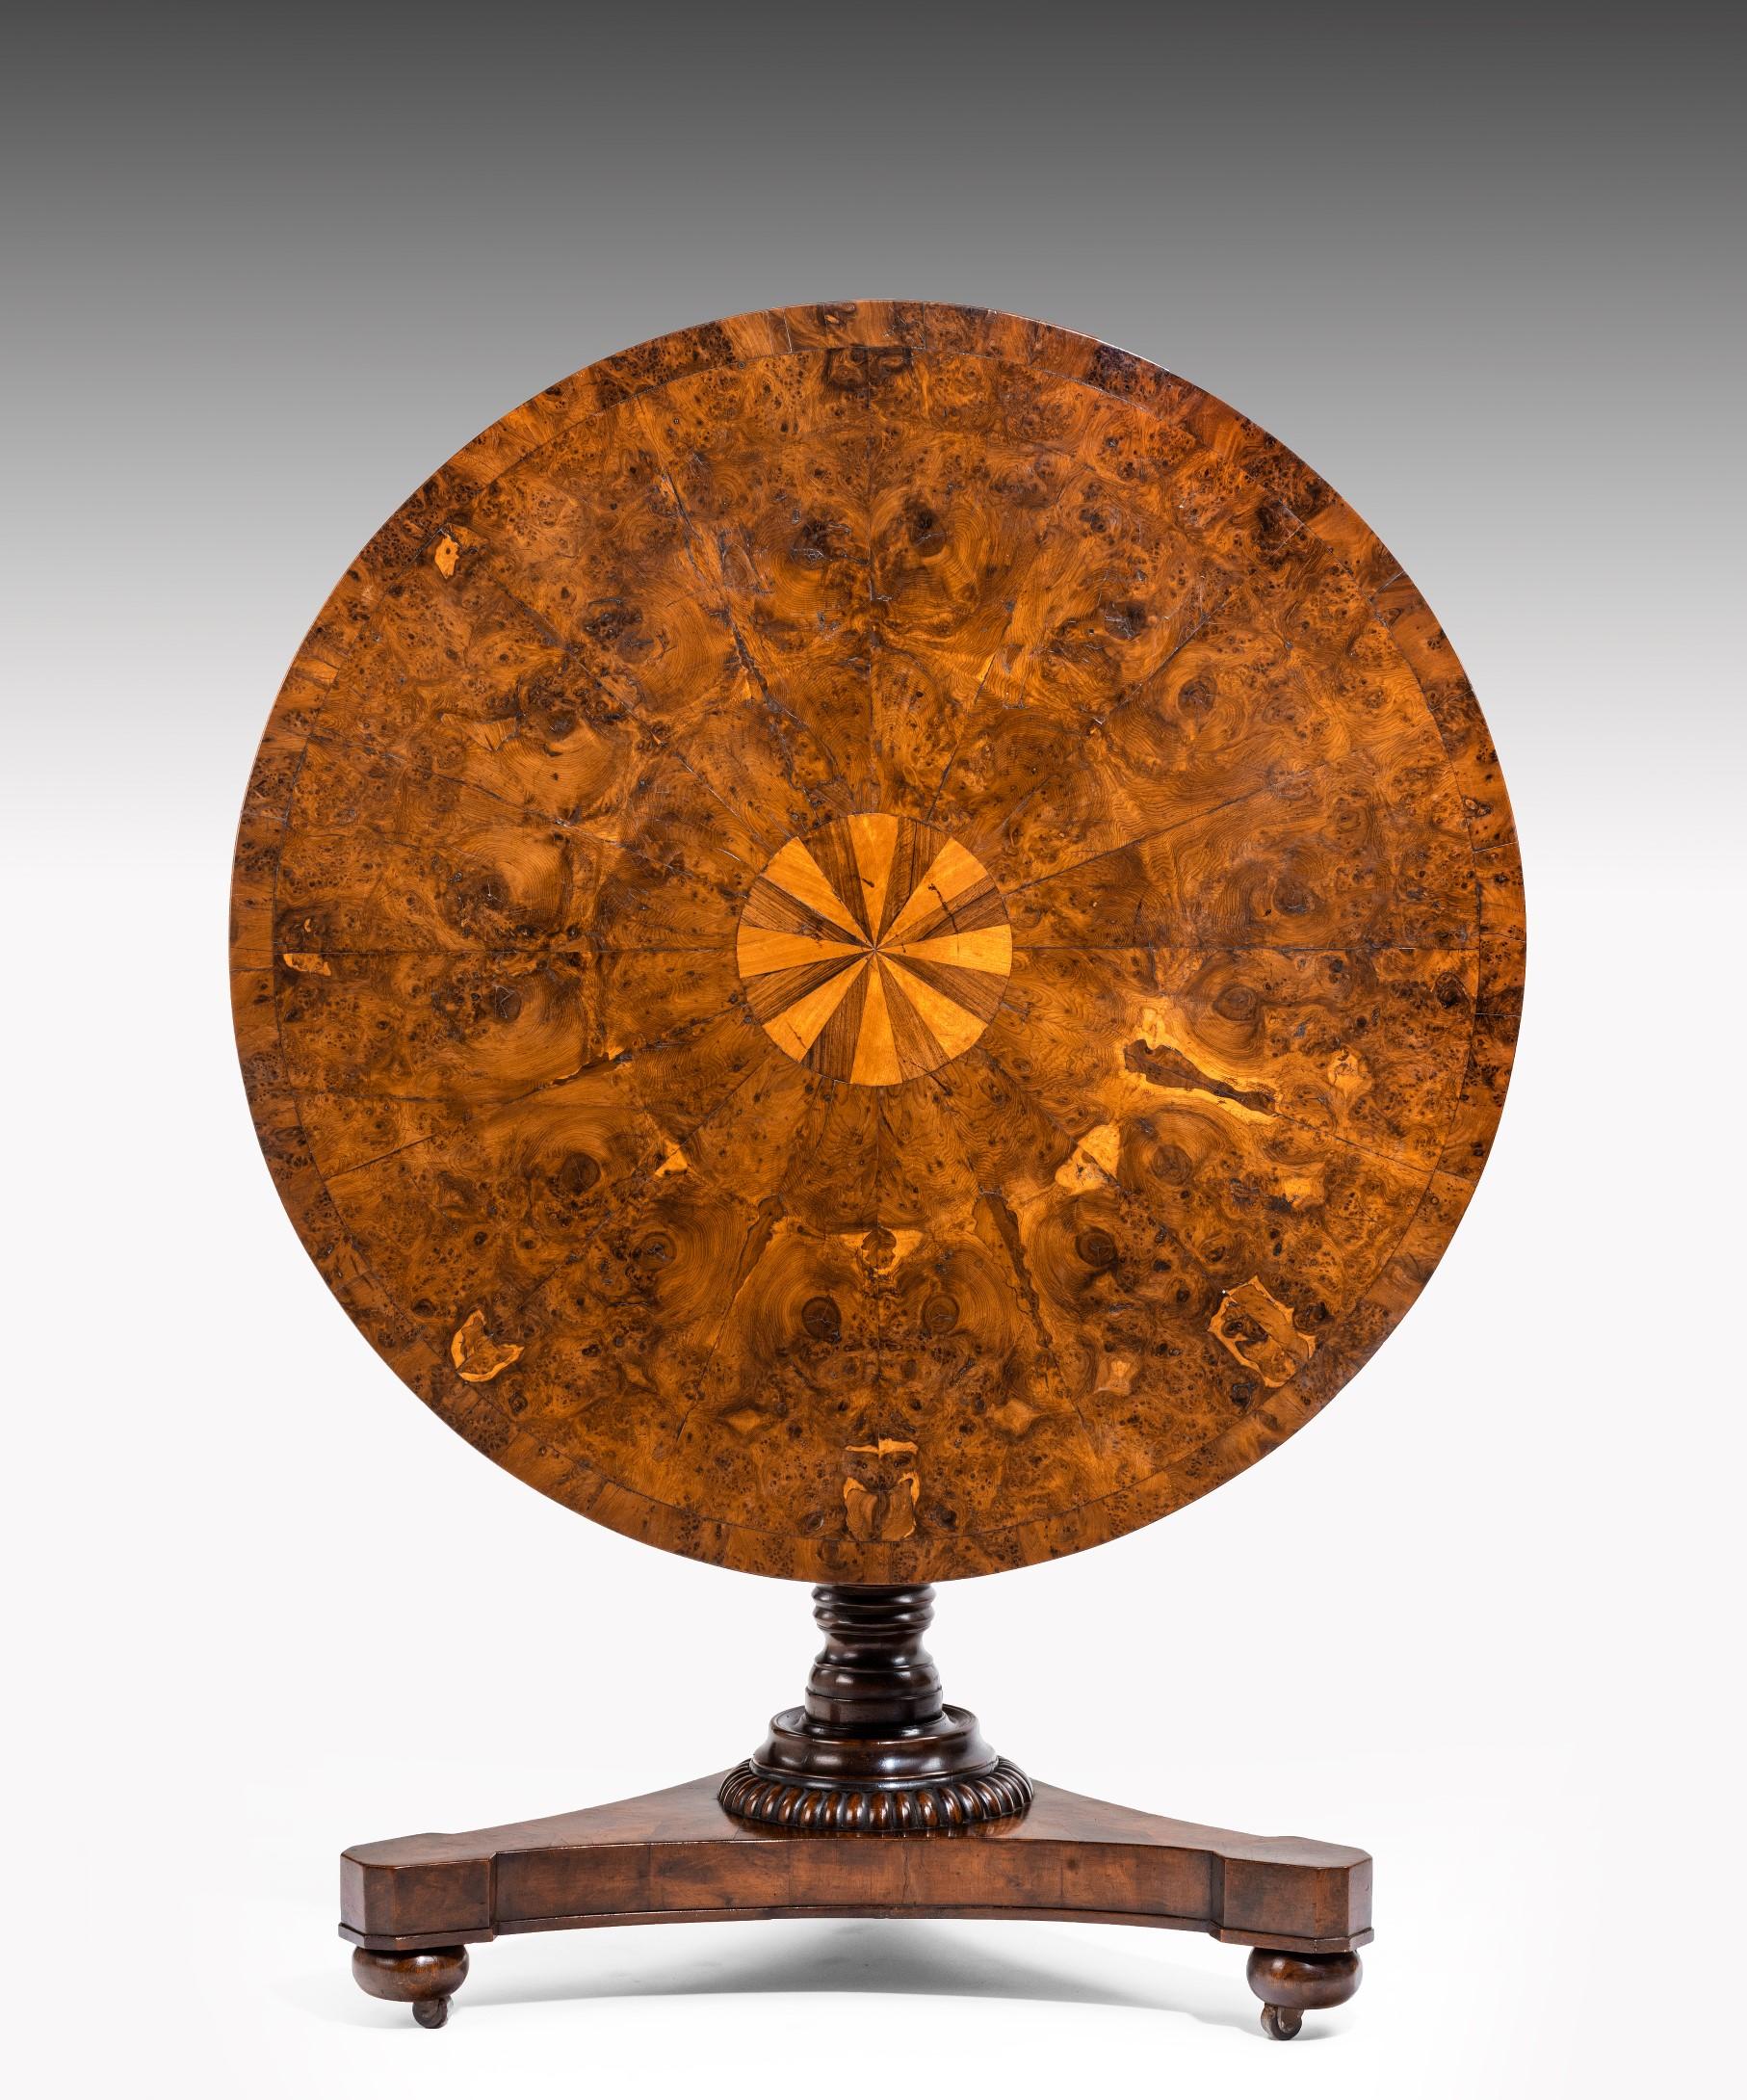 A Regency period centre table veneered in burr yew; the table's top segment veneered in yew wood with a central inlayed circle of satinwood and rosewood; the table is raised on a turned stem which terminates in a triform base.

This centre table